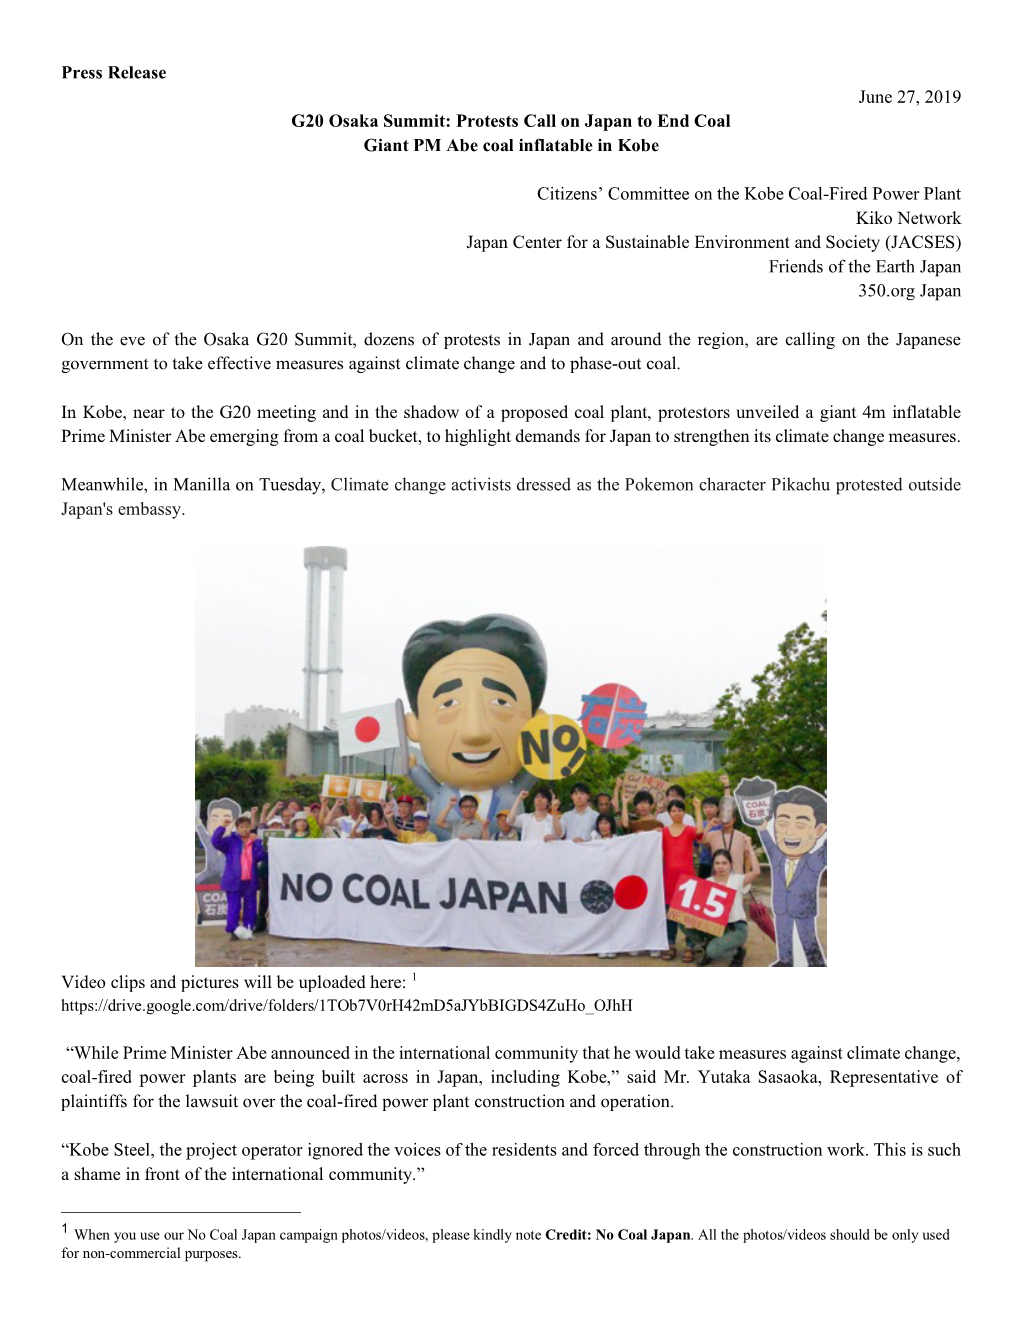 Press Release June 27, 2019 G20 Osaka Summit: Protests Call on Japan to End Coal Giant PM Abe Coal Inflatable in Kobe Citizens K